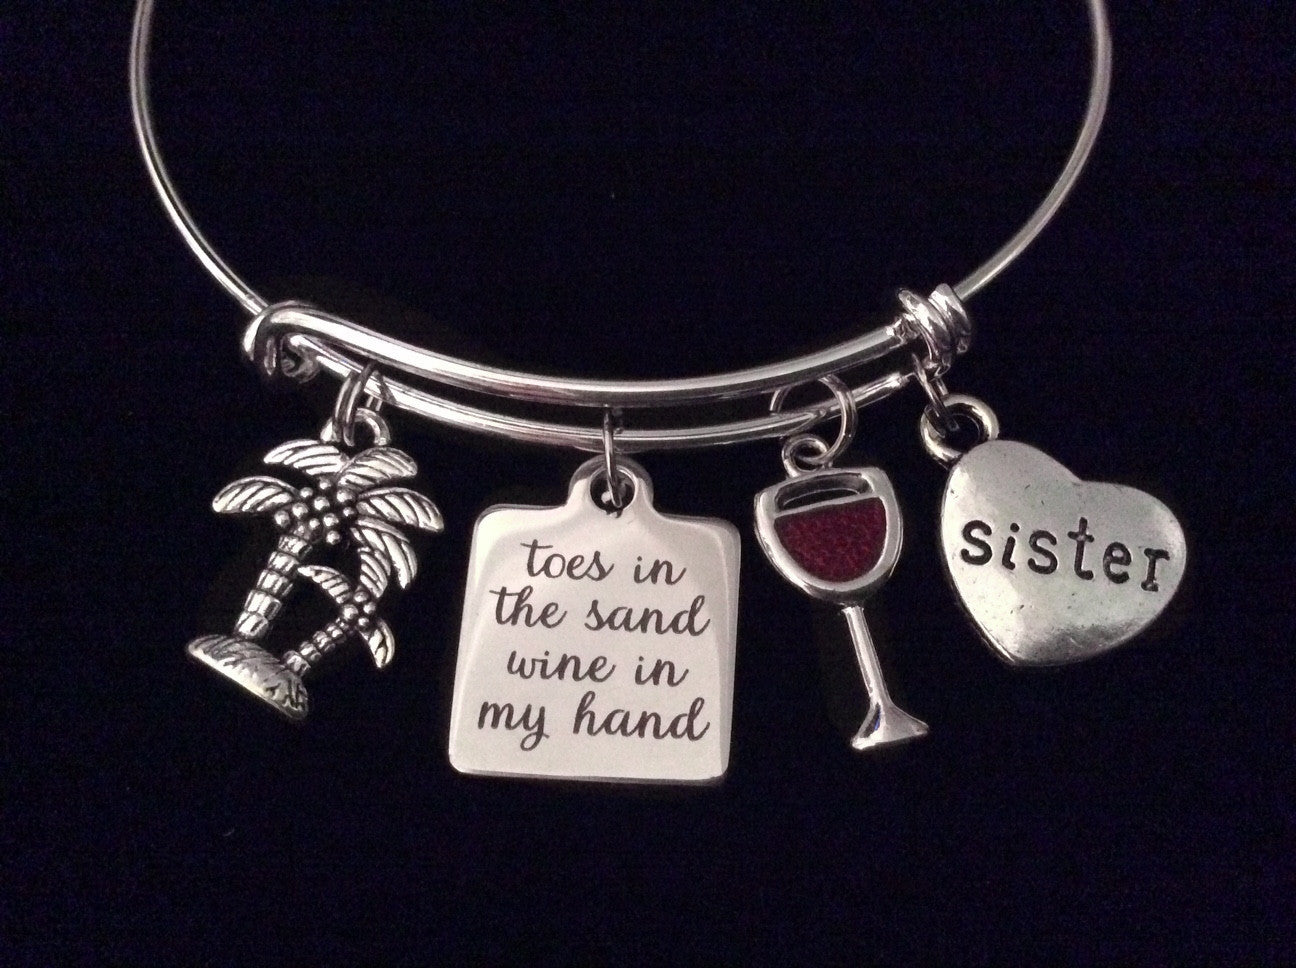 Sister Toes in the Sand Wine in my Hand Expandable Silver Charm Bracelet Ocean Nautical Adjustable W